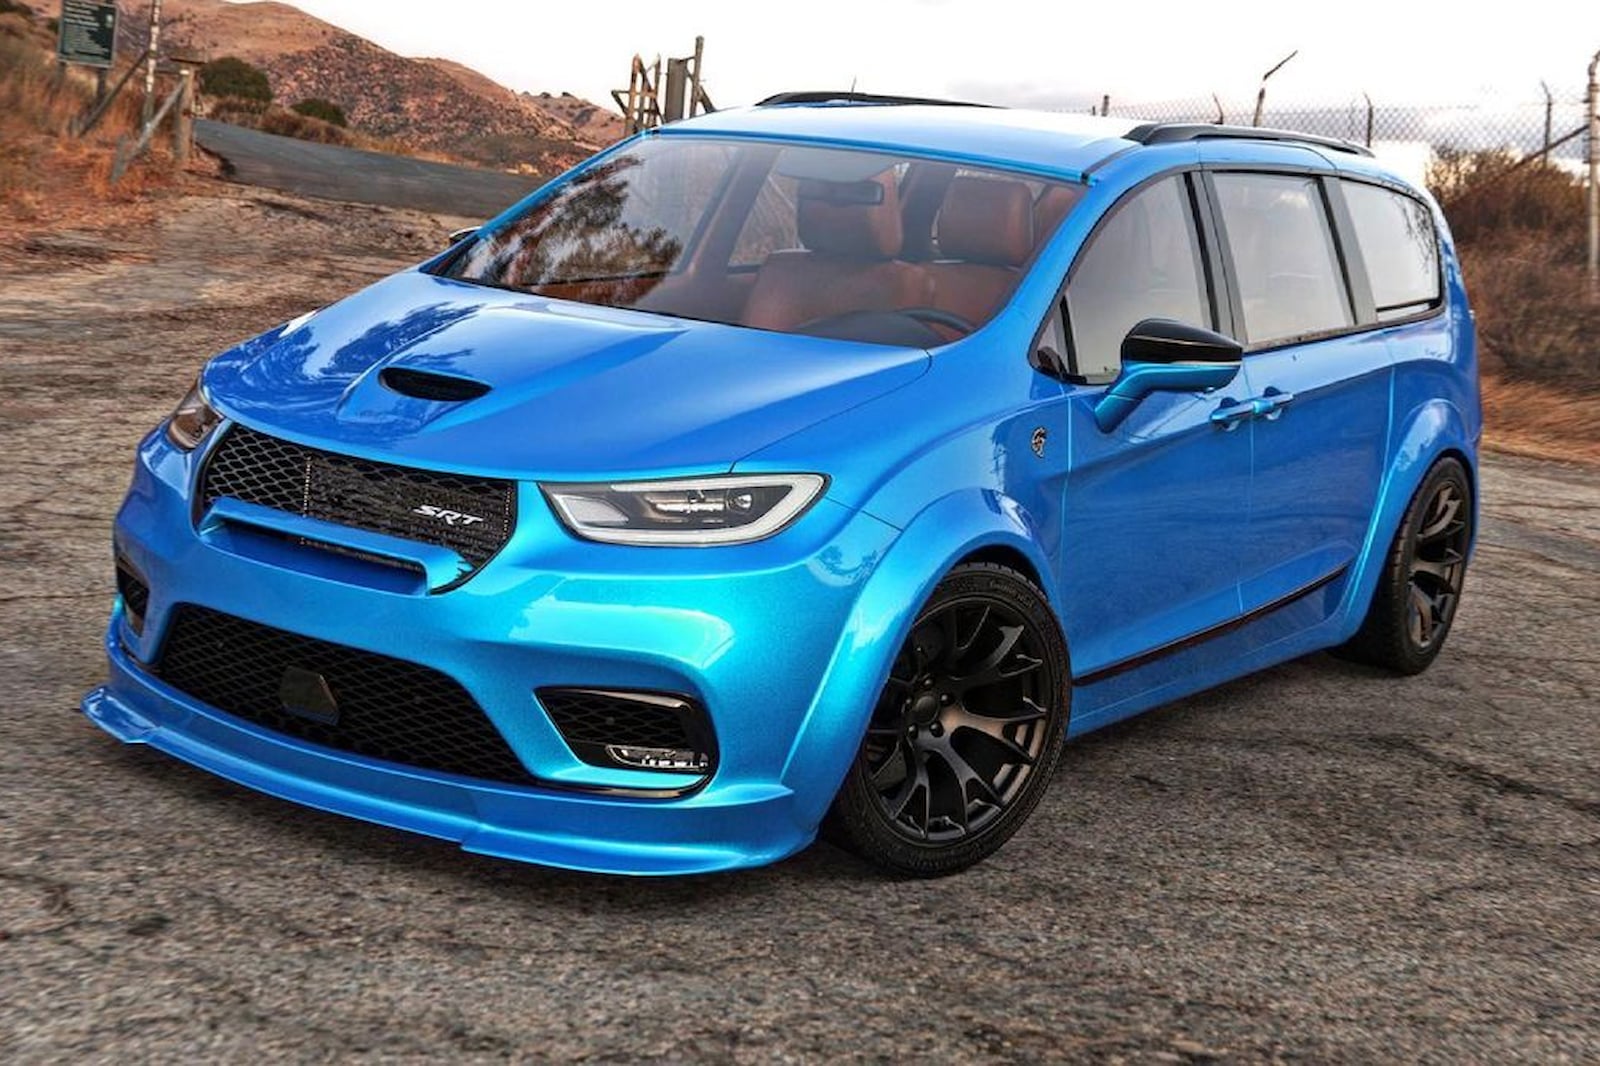 Hellcat-Powered Pacifica Minivan Is Really Happening